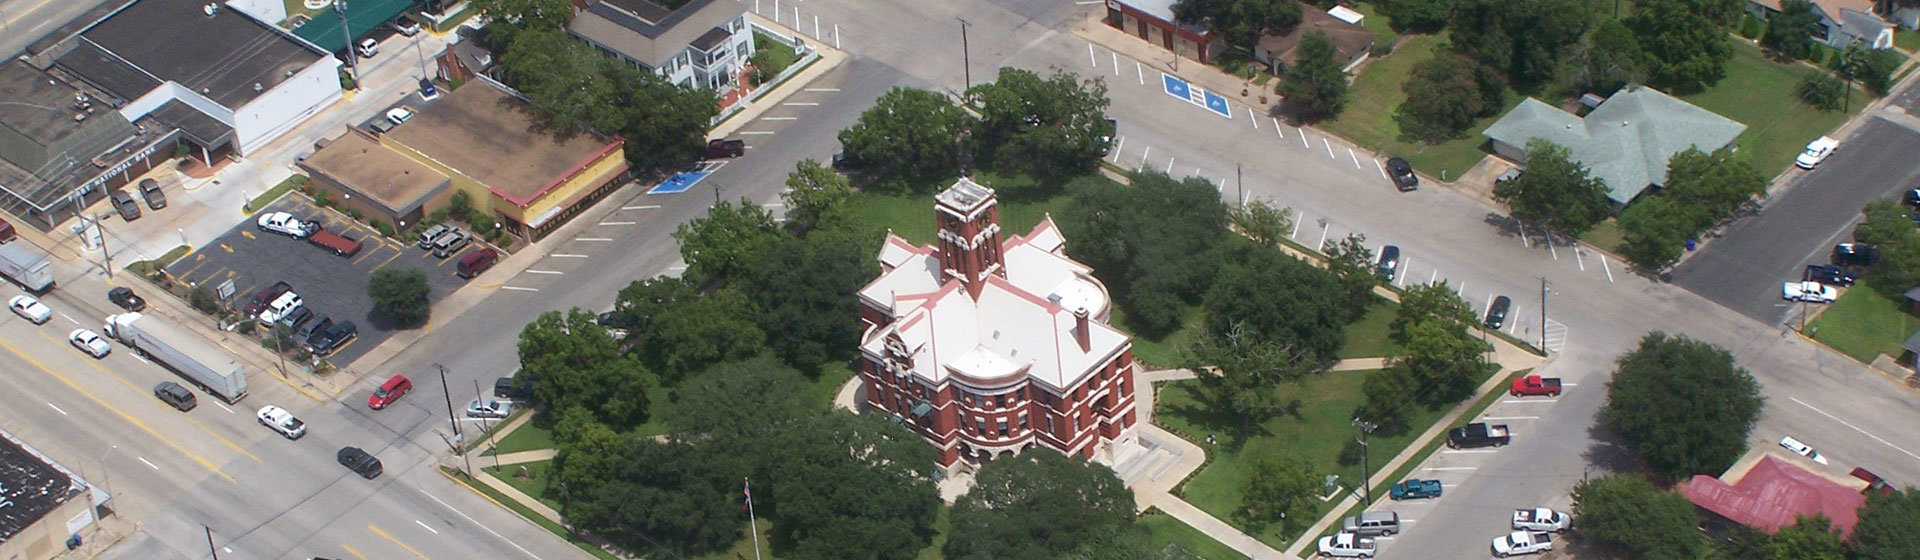 Aerial view of the courthouse